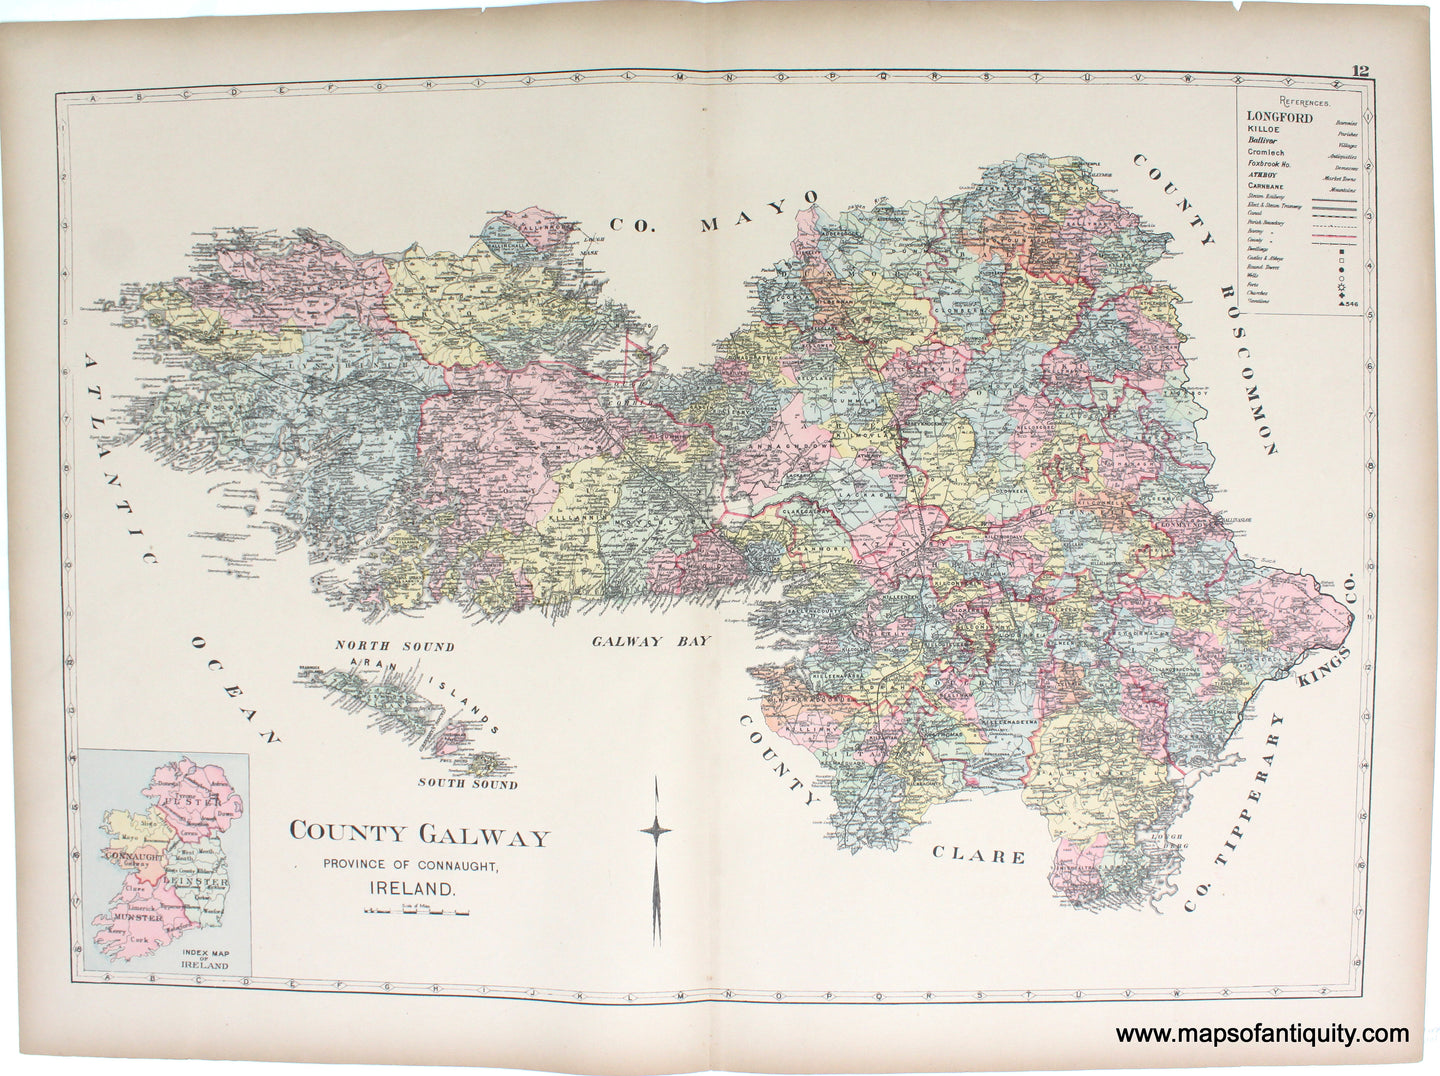 1901 - County Galway, Province of Connaught, Ireland. - Antique Map